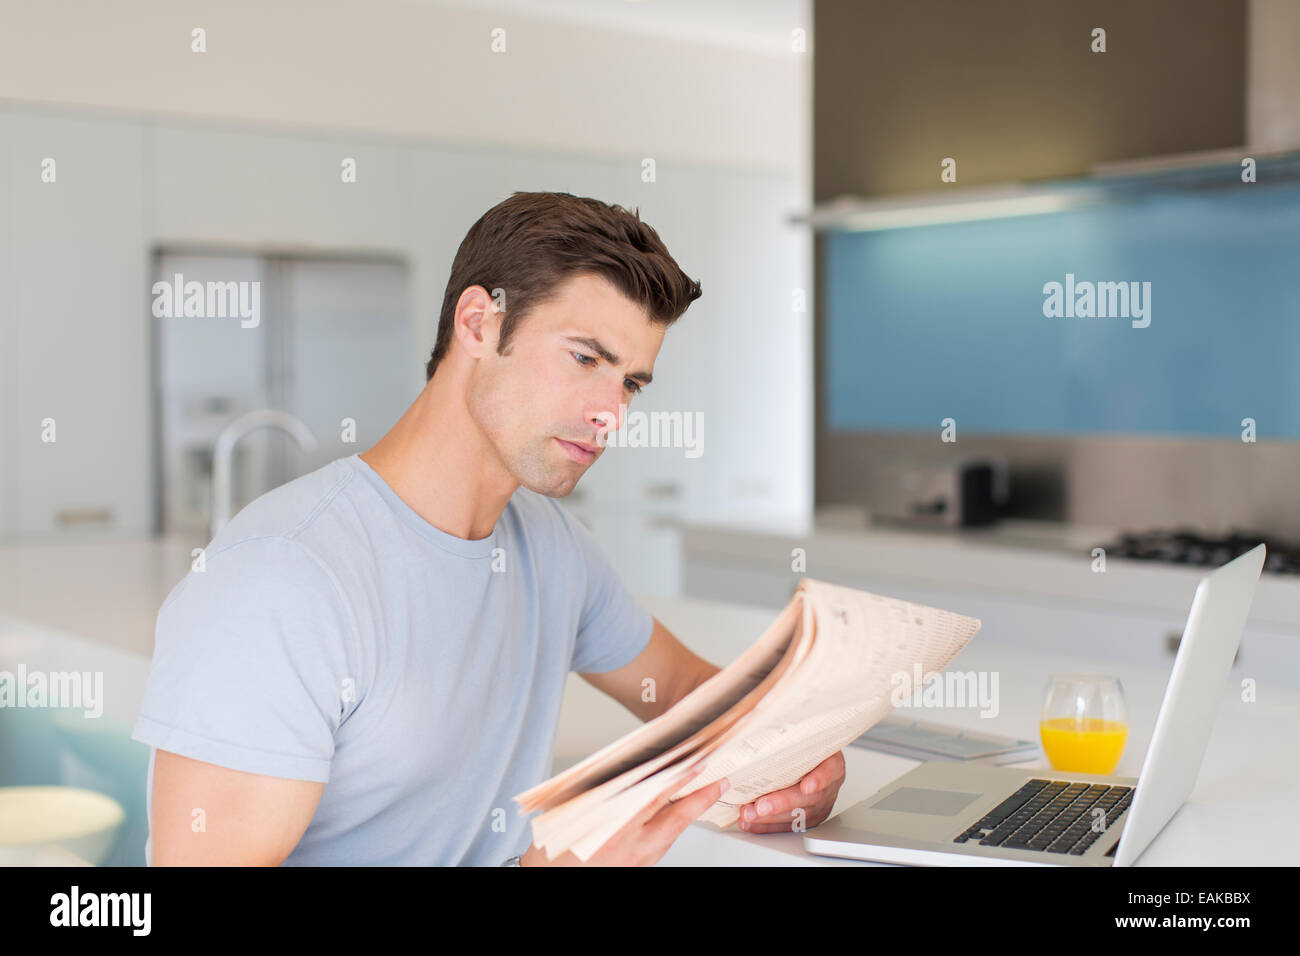 Man reading newspaper in modern kitchen, laptop and orange juice on counter Stock Photo